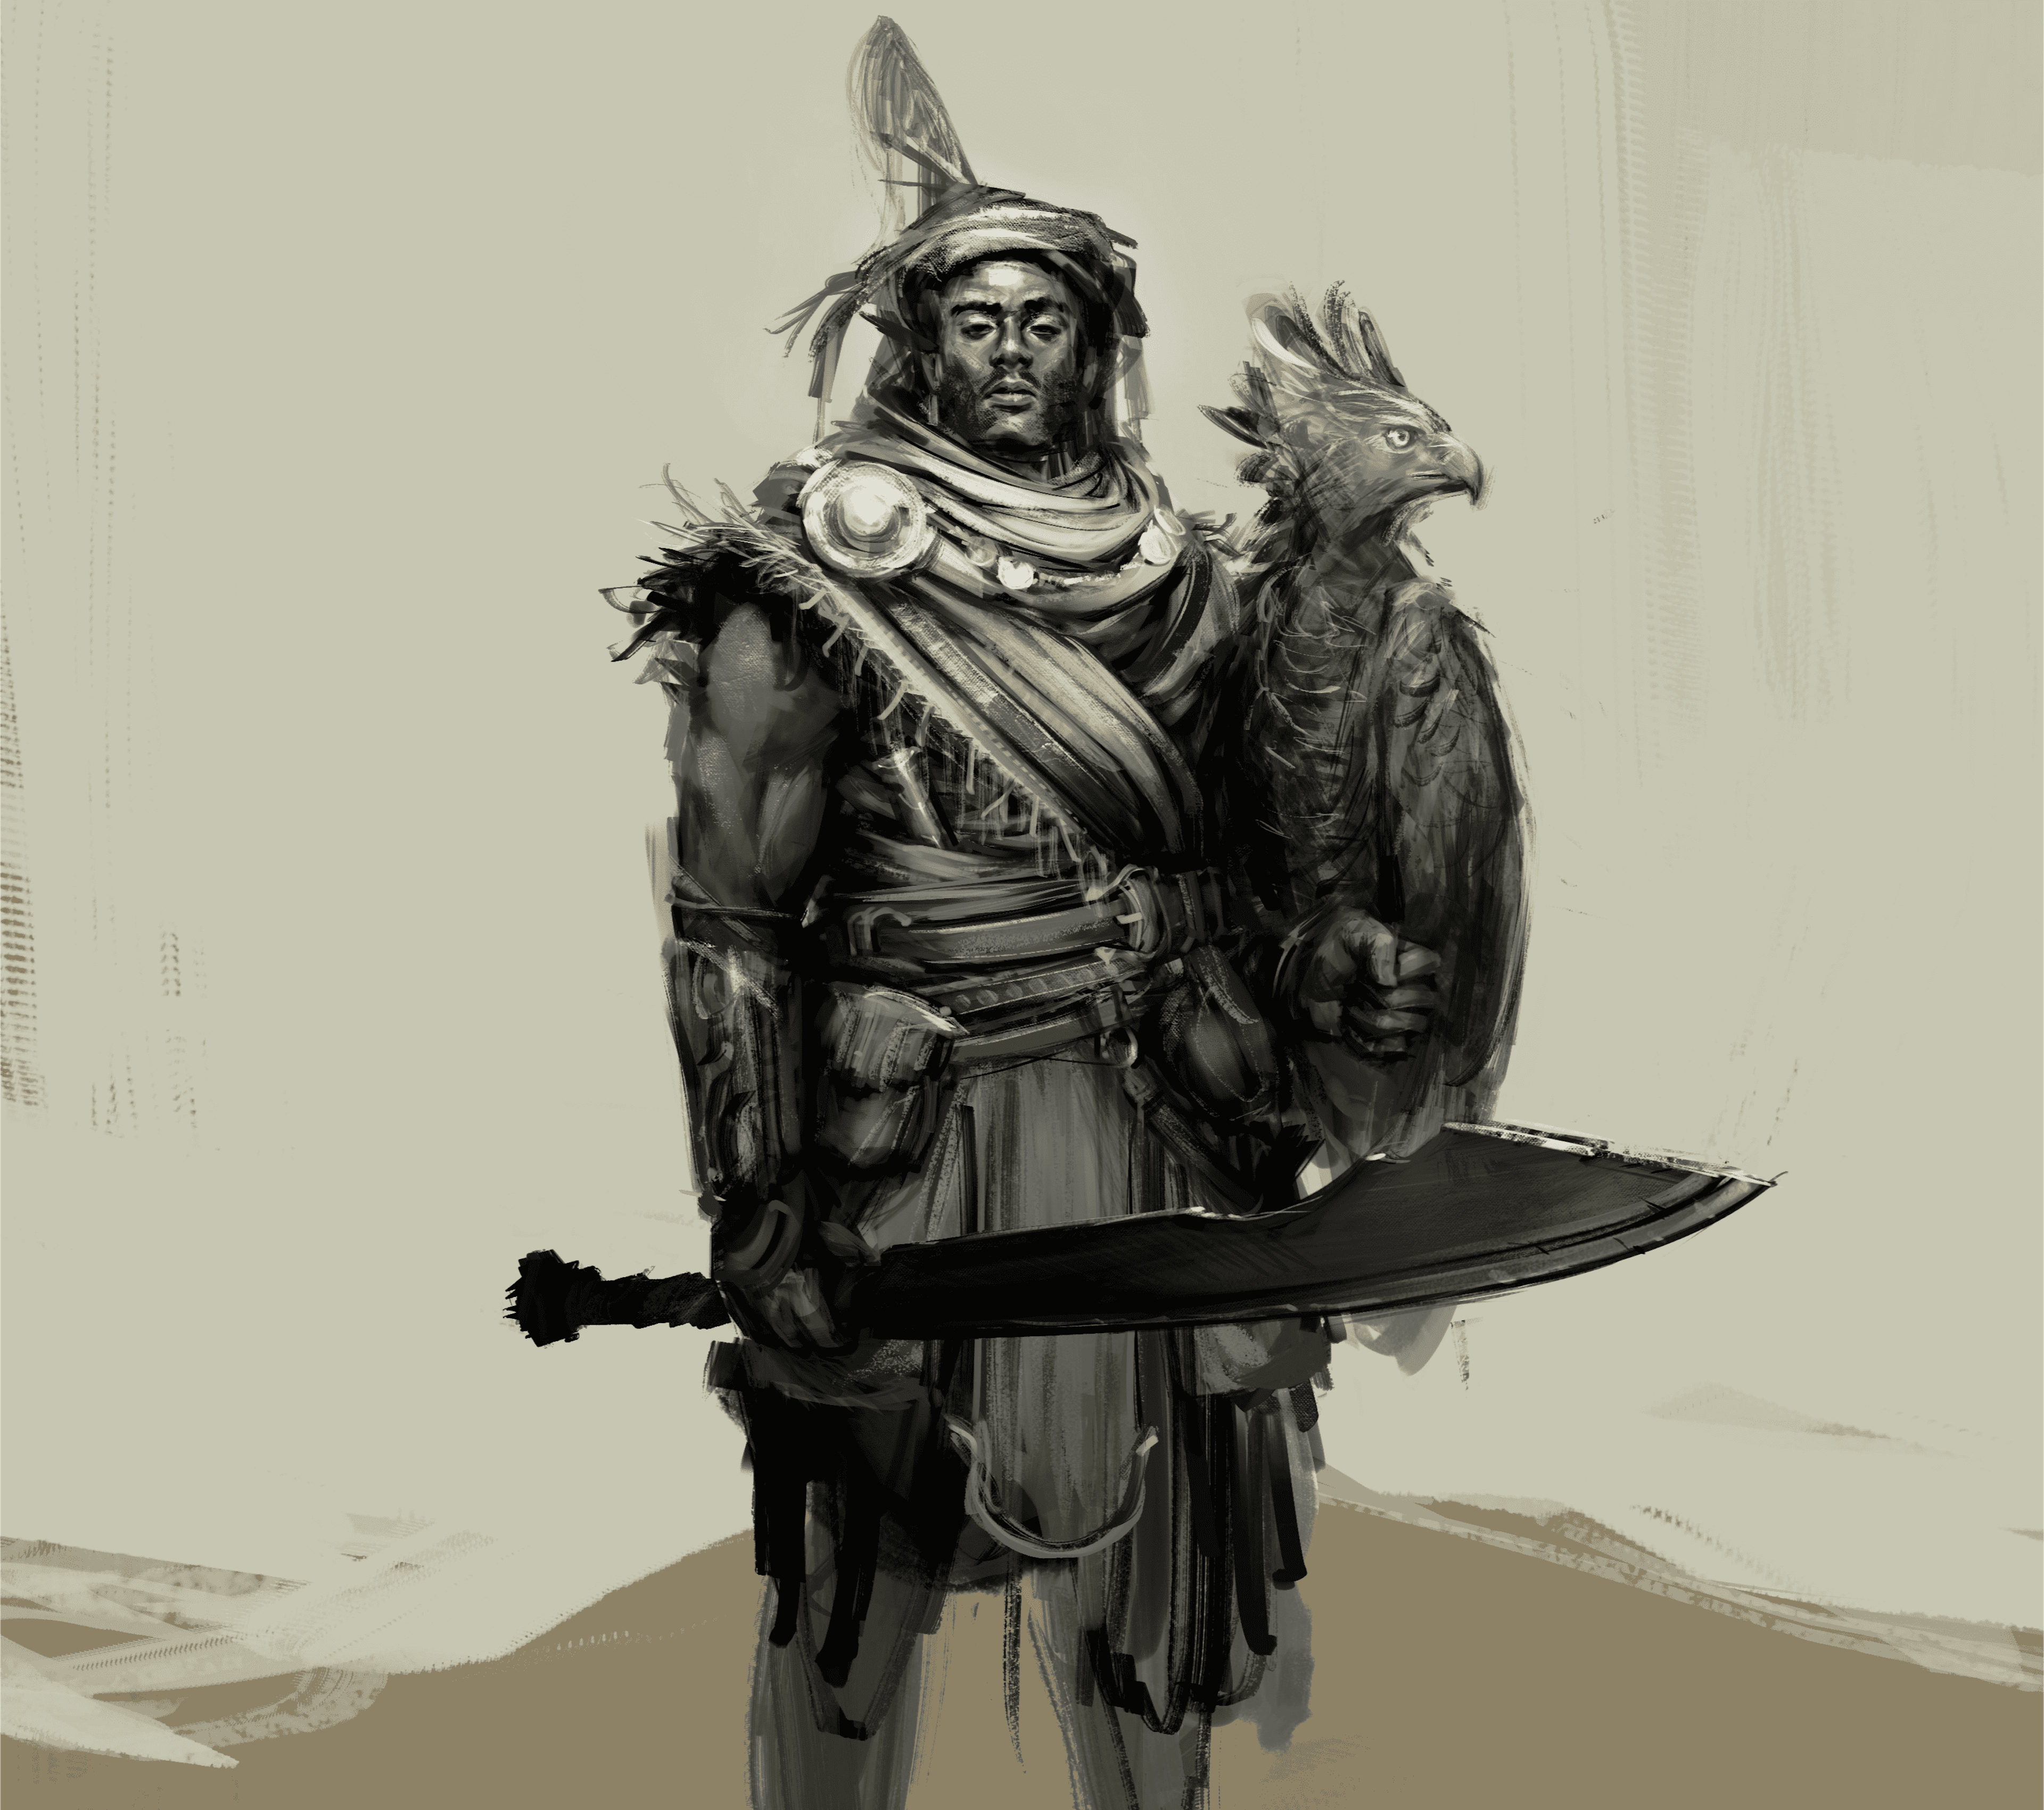 Concept art of a warrior with an eagle